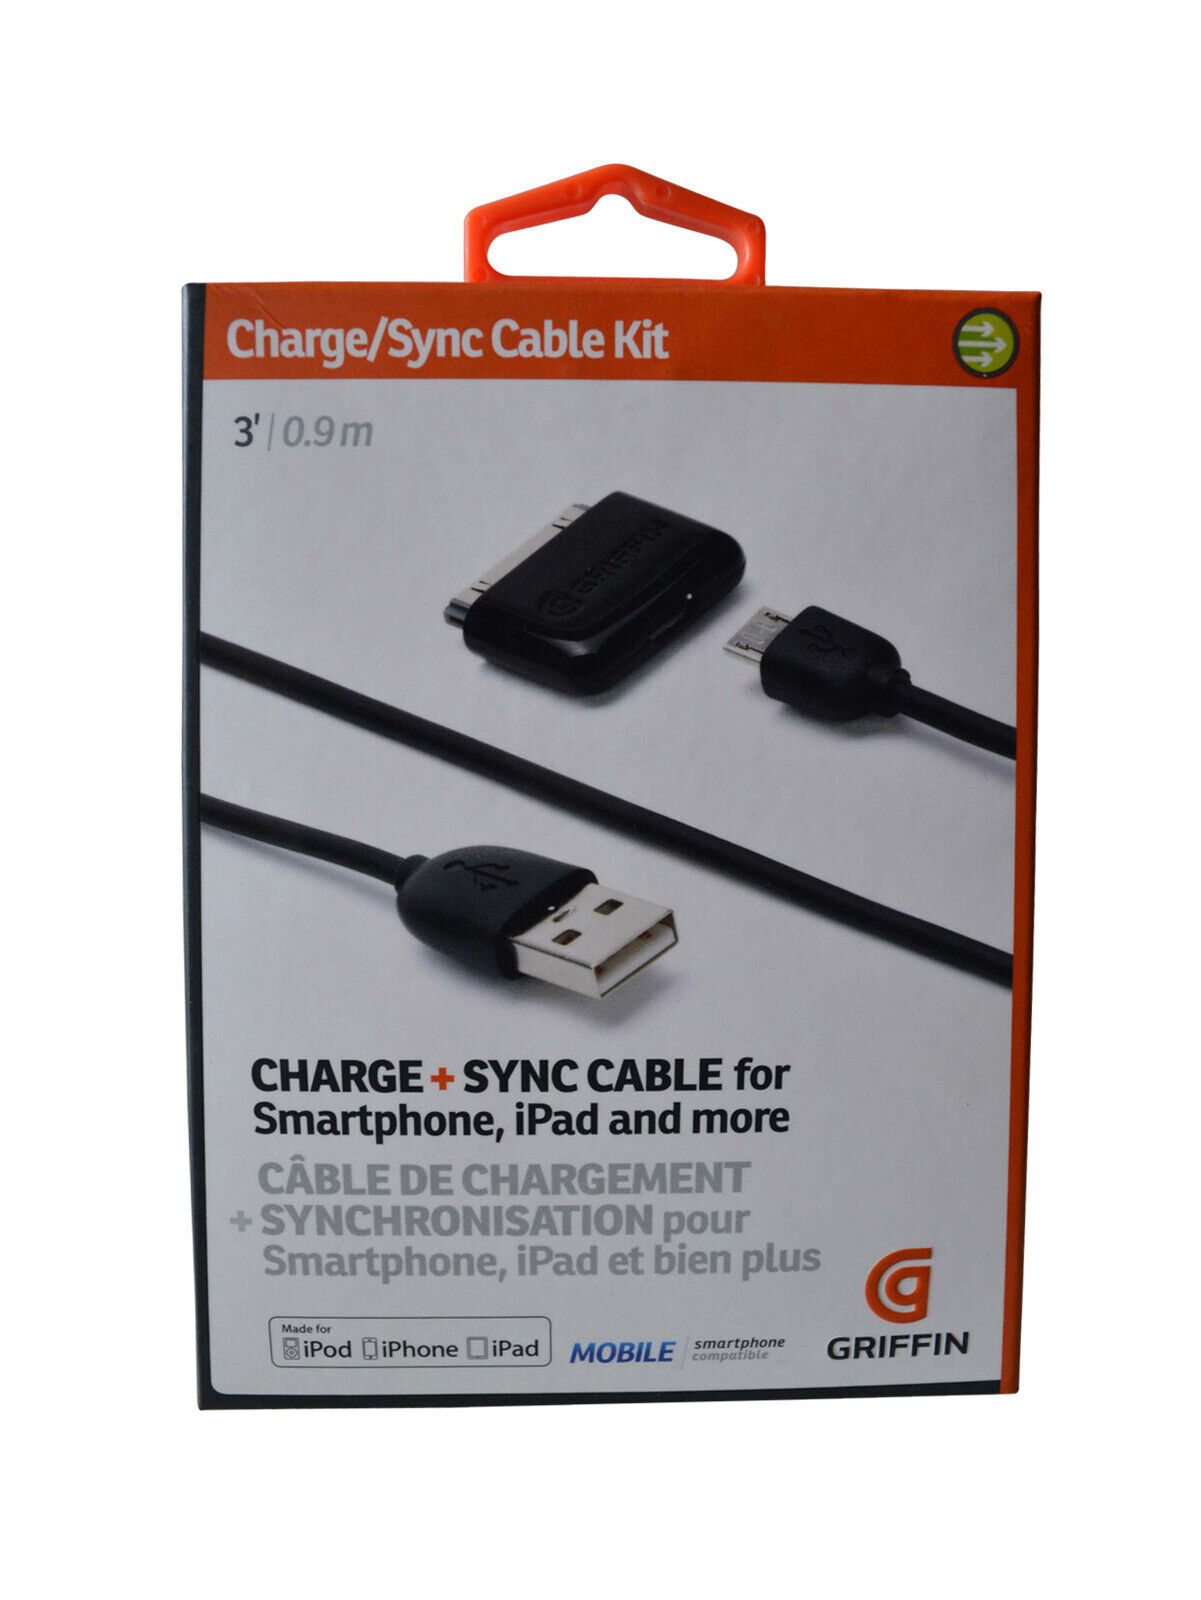 Griffin Charge/Sync Cable Kit for Micro USB Smartphones, iPhone, iPod, or iPad